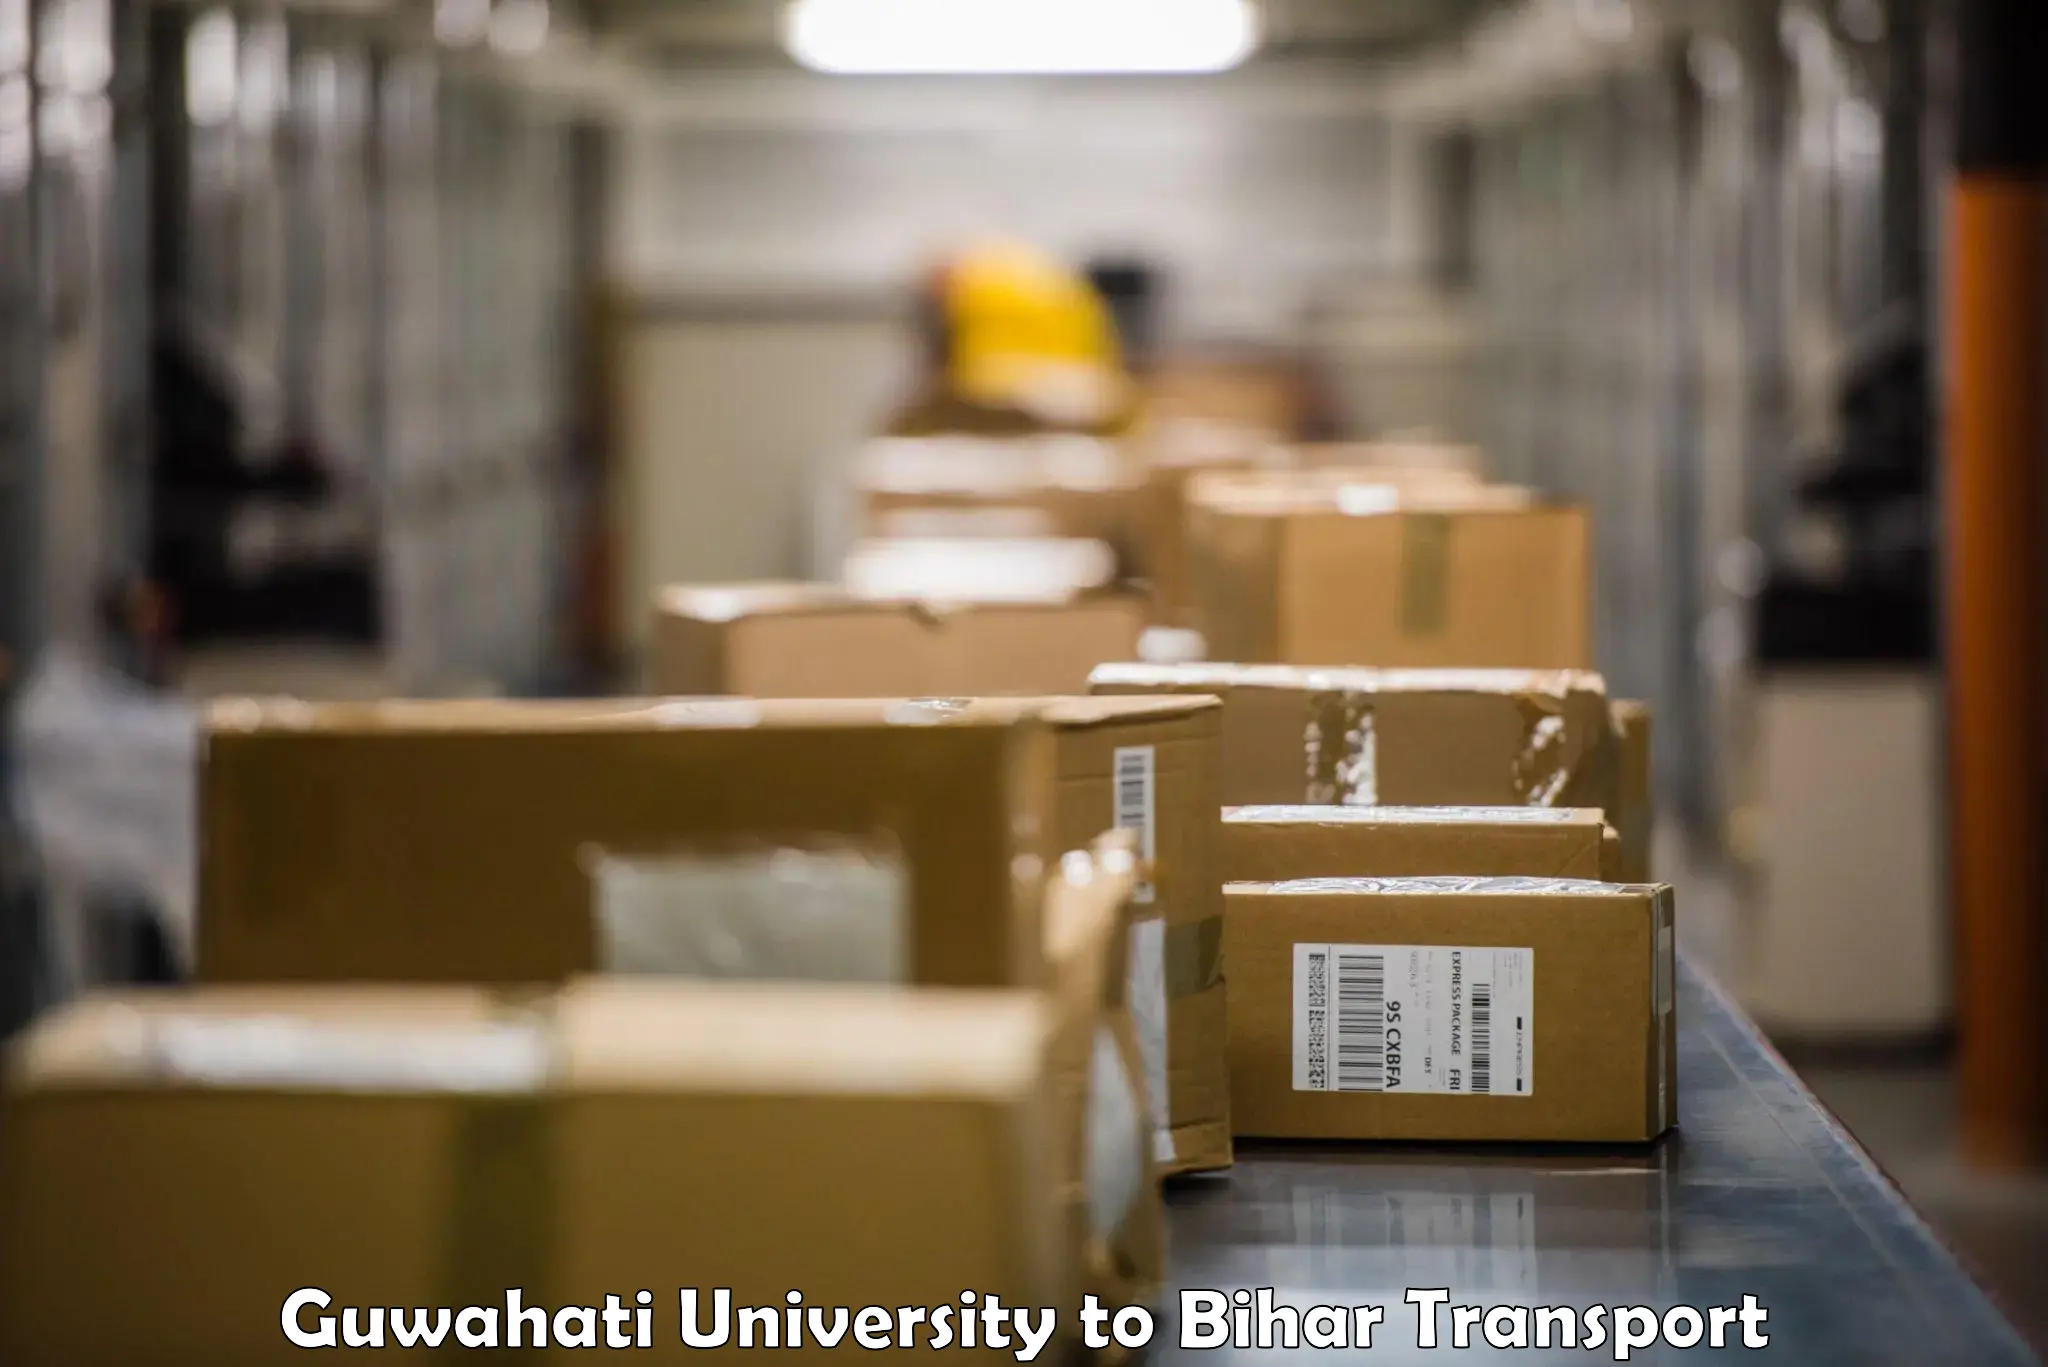 Road transport online services in Guwahati University to Sheonar